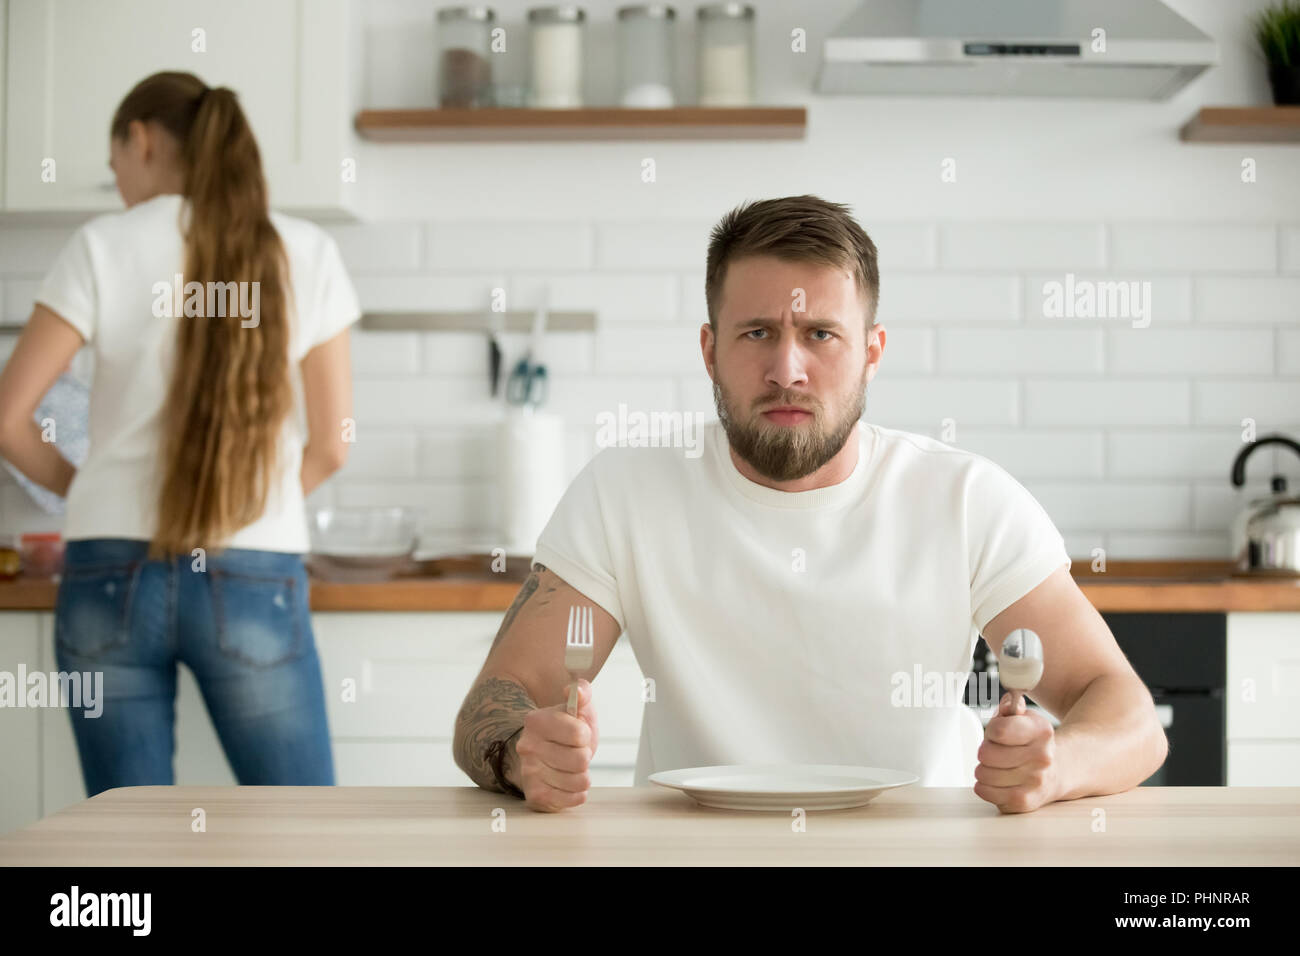 Dissatisfied man waiting for dinner cooked by wife Stock Photo